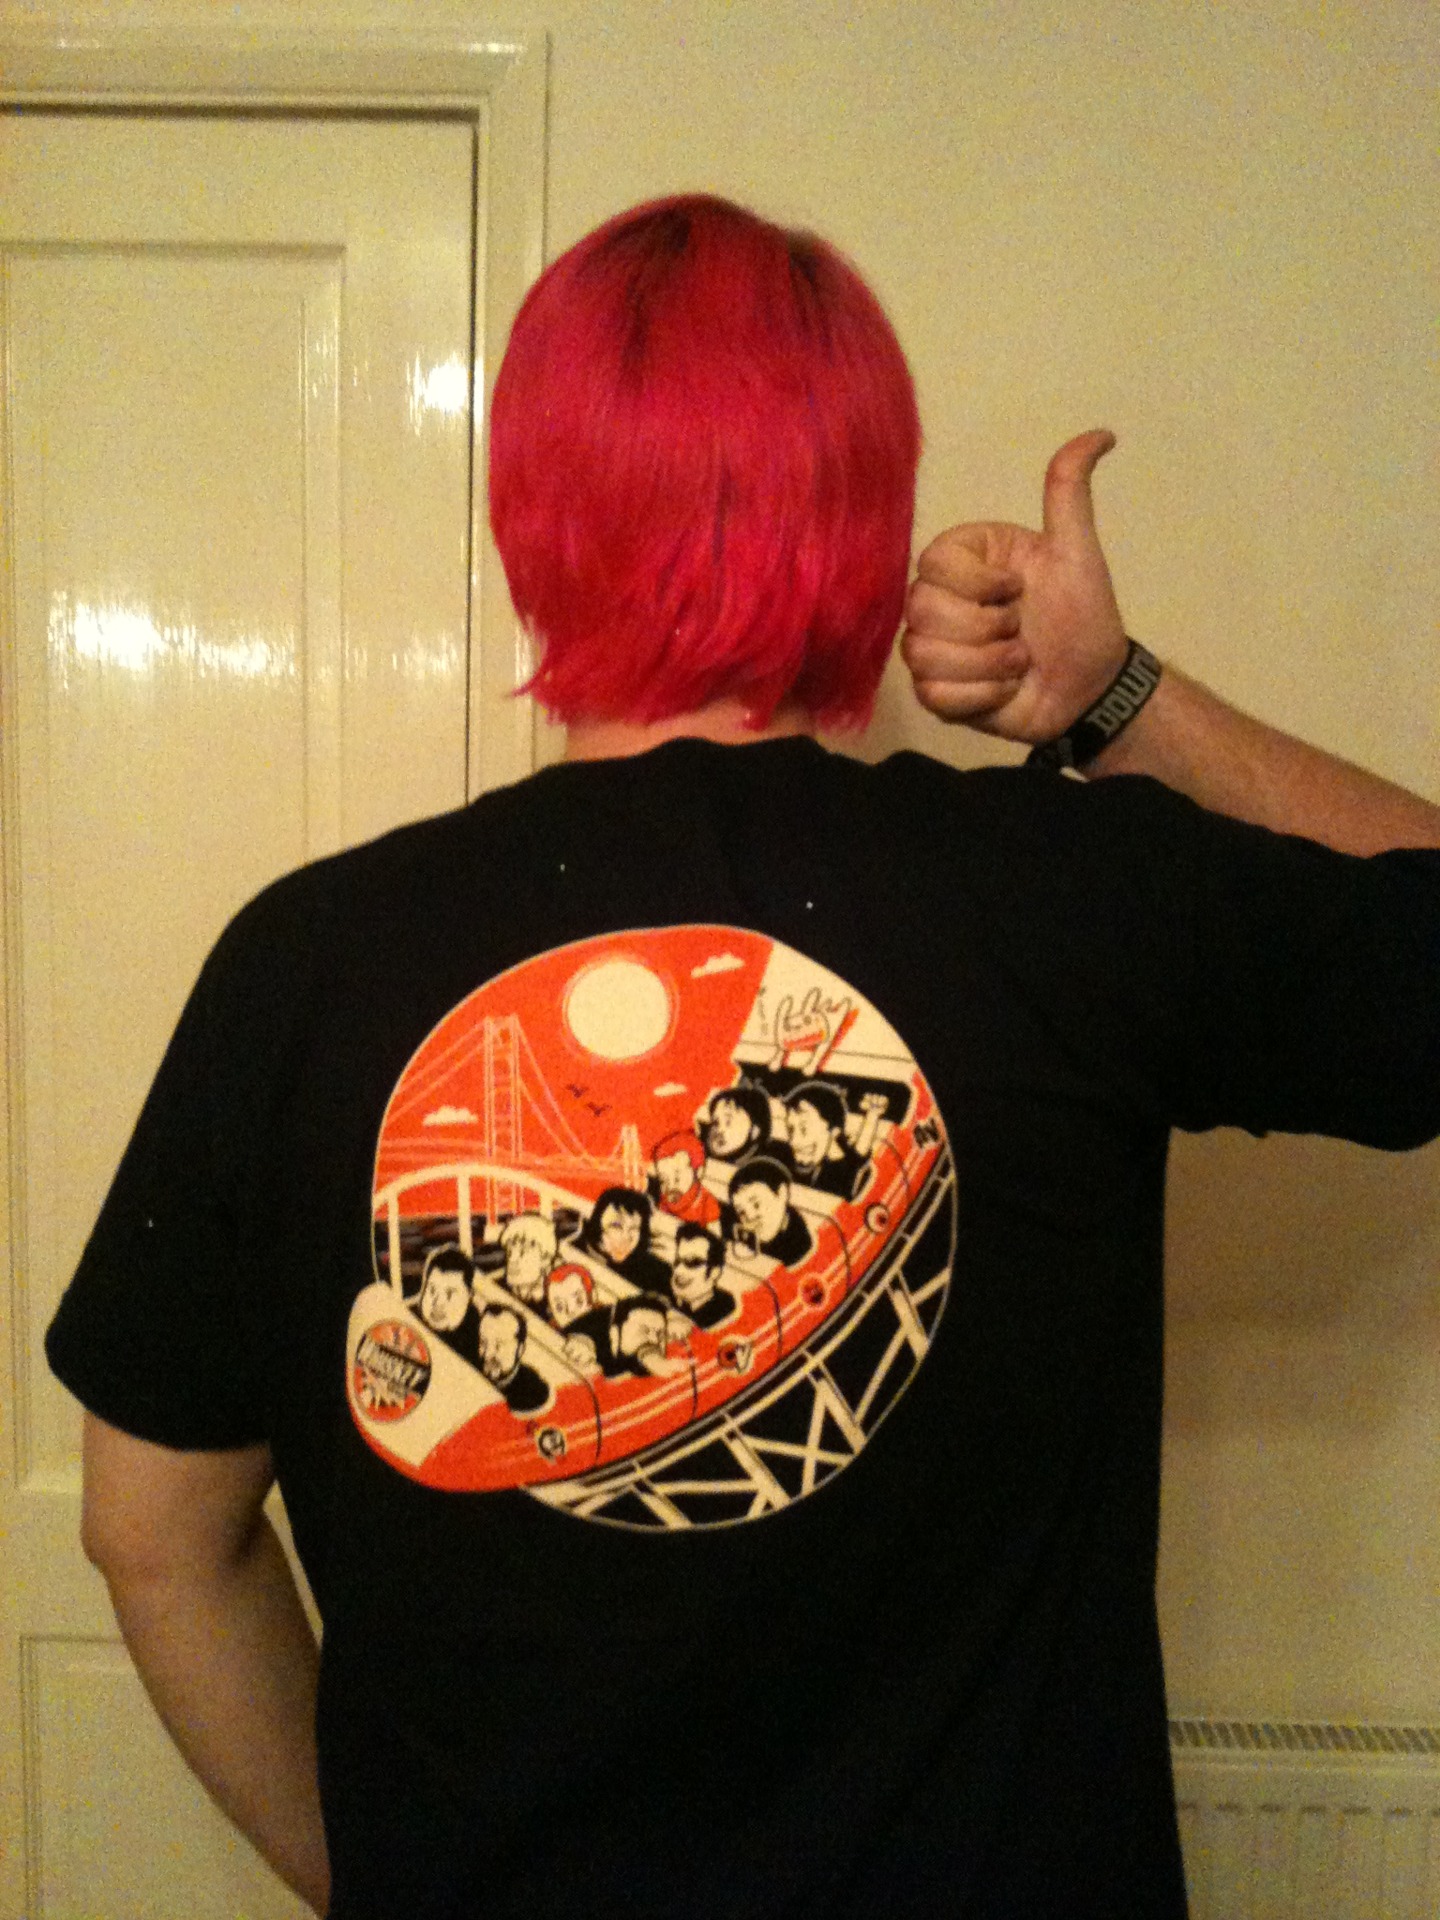  As promised one born and bred british wiskey loving fan :P ......and no thats not a wig my hair really is pink 